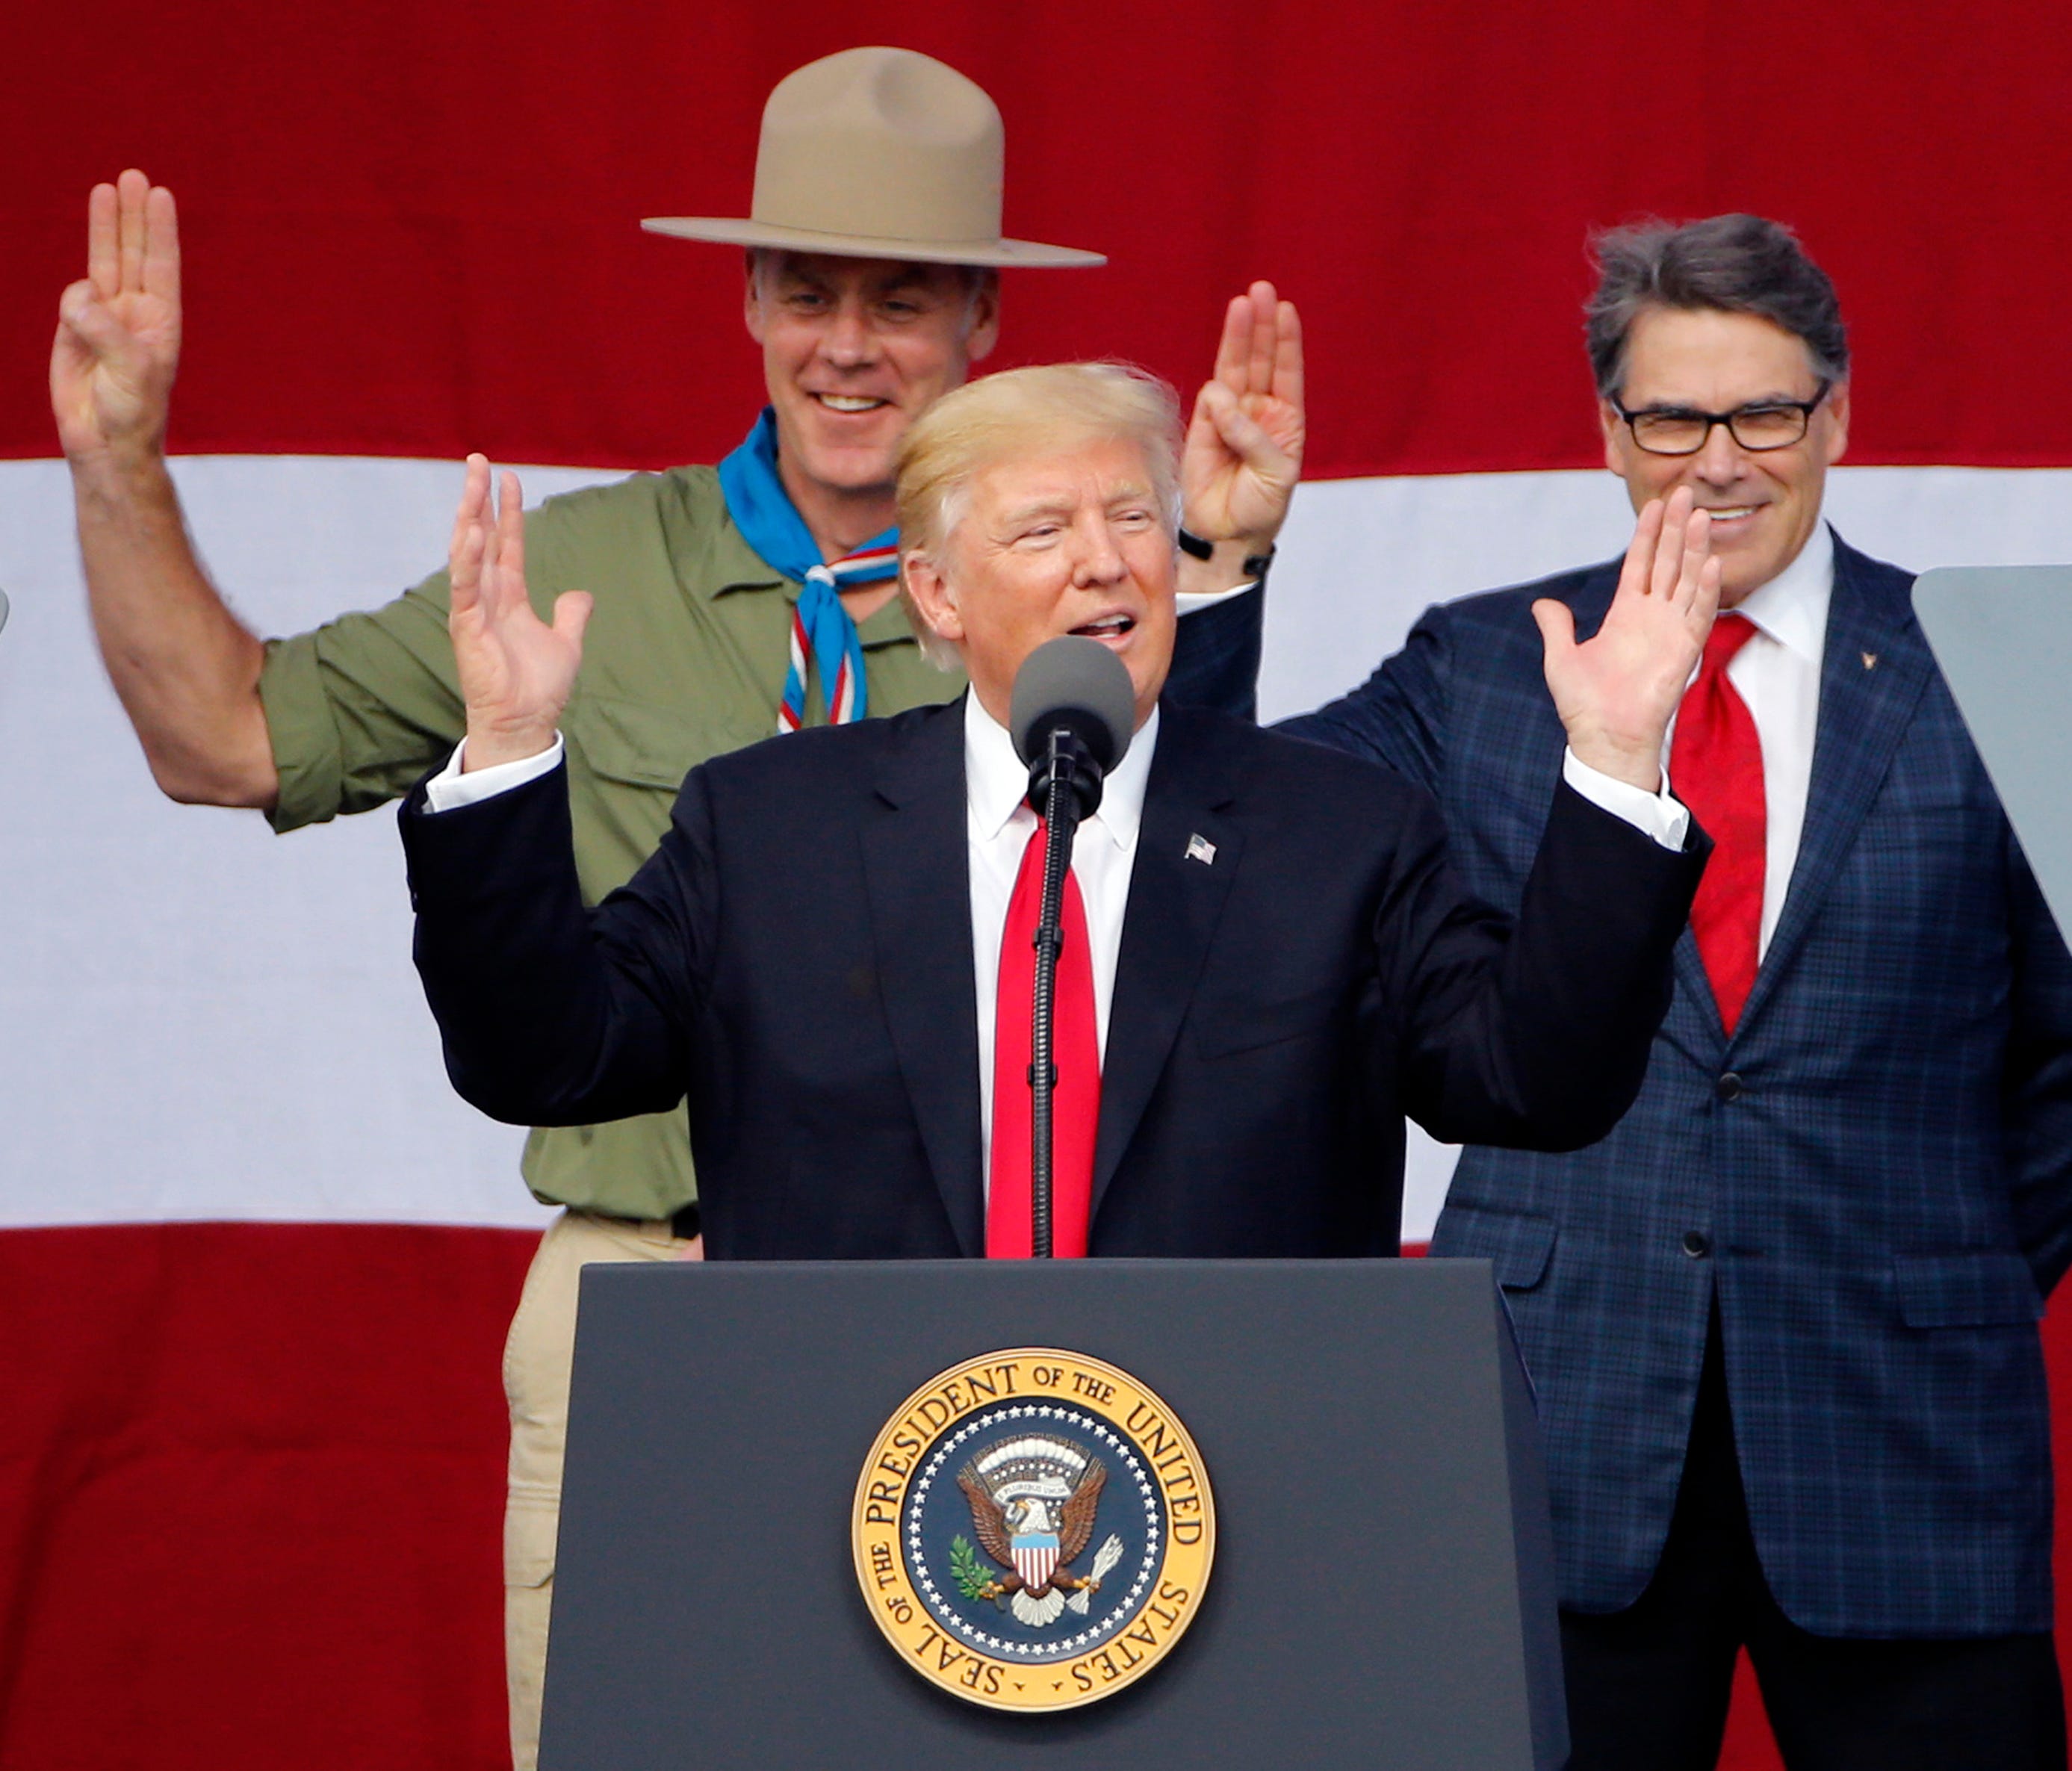 President Trump gestures as former Boy Scouts, Interior Secretary Ryan Zinke, left, Energy Secretary Rick Perry, watch at the 2017 National Boy Scout Jamboree at the Summit in Glen Jean,W. Va.,  July 24, 2017.